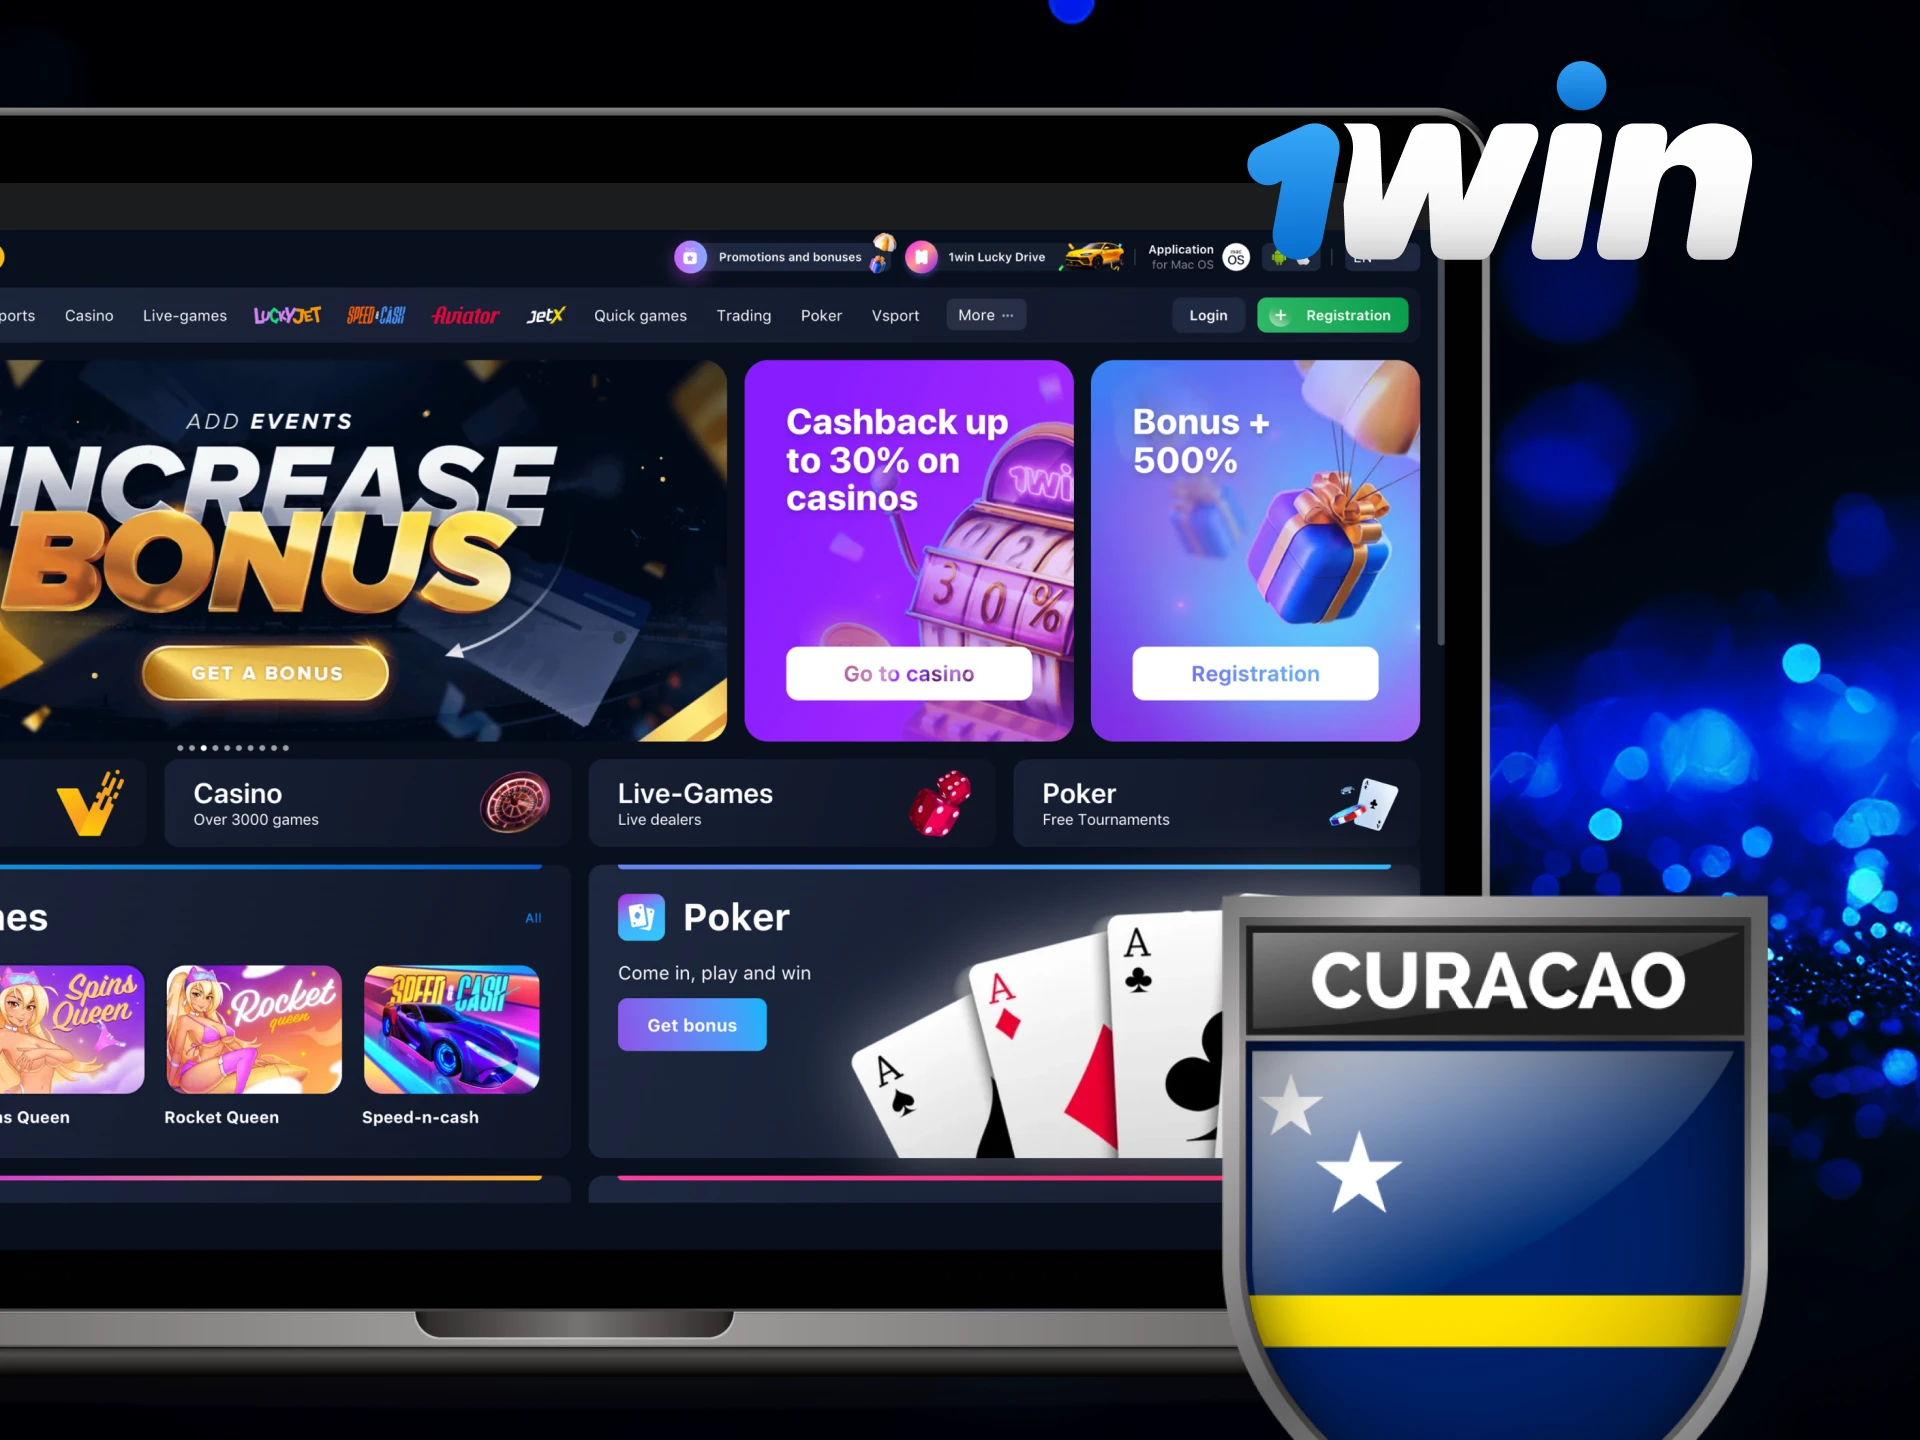 1Win Casino is legal in India and has a Curacao gaming license.